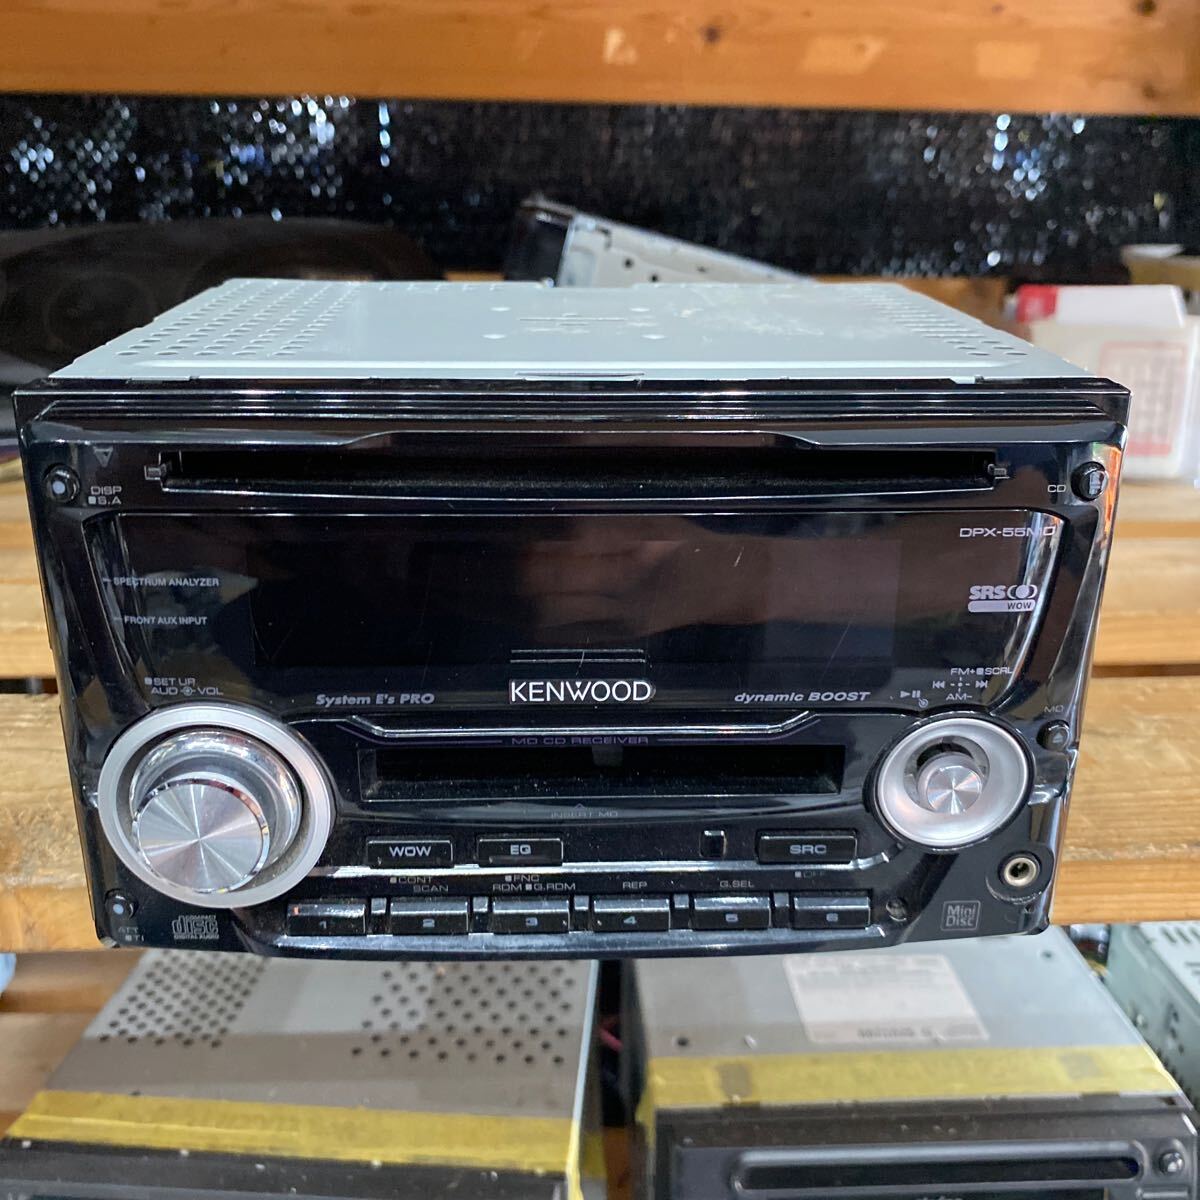 KENWOOD MD/CD/AUX DPX-55MD